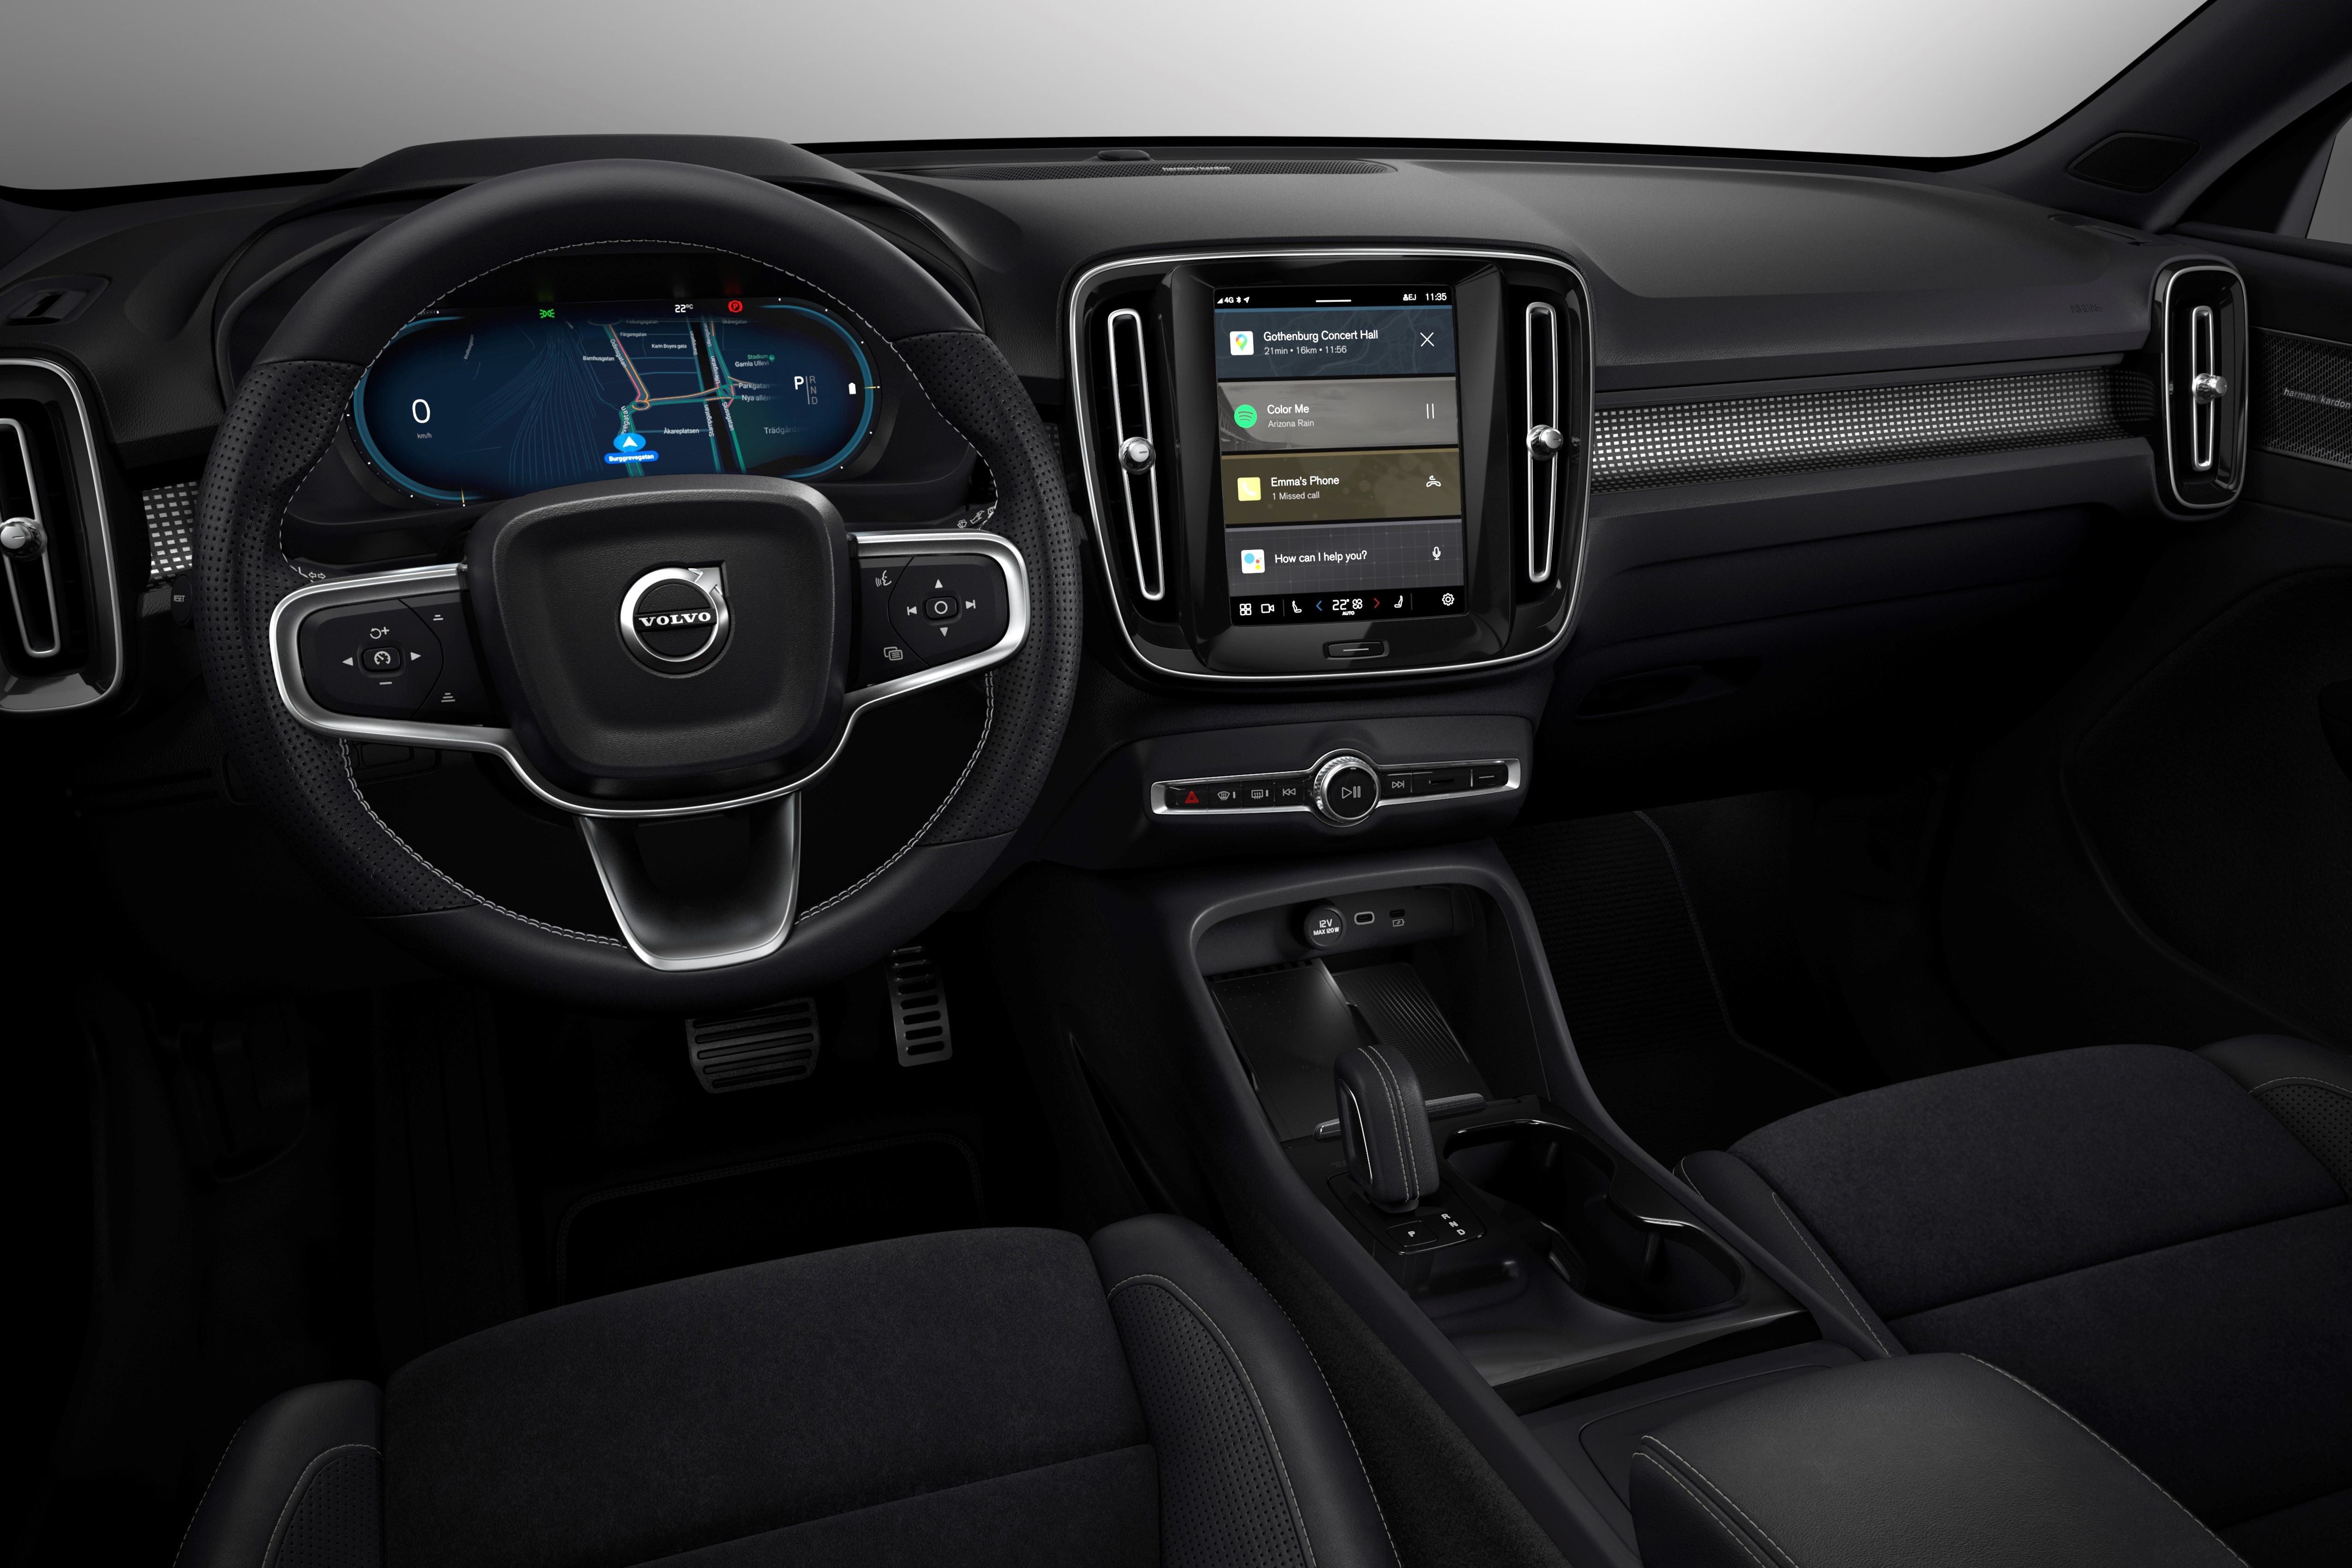 Volvo Cars safety experts say: use technology to support drivers and reduce distraction